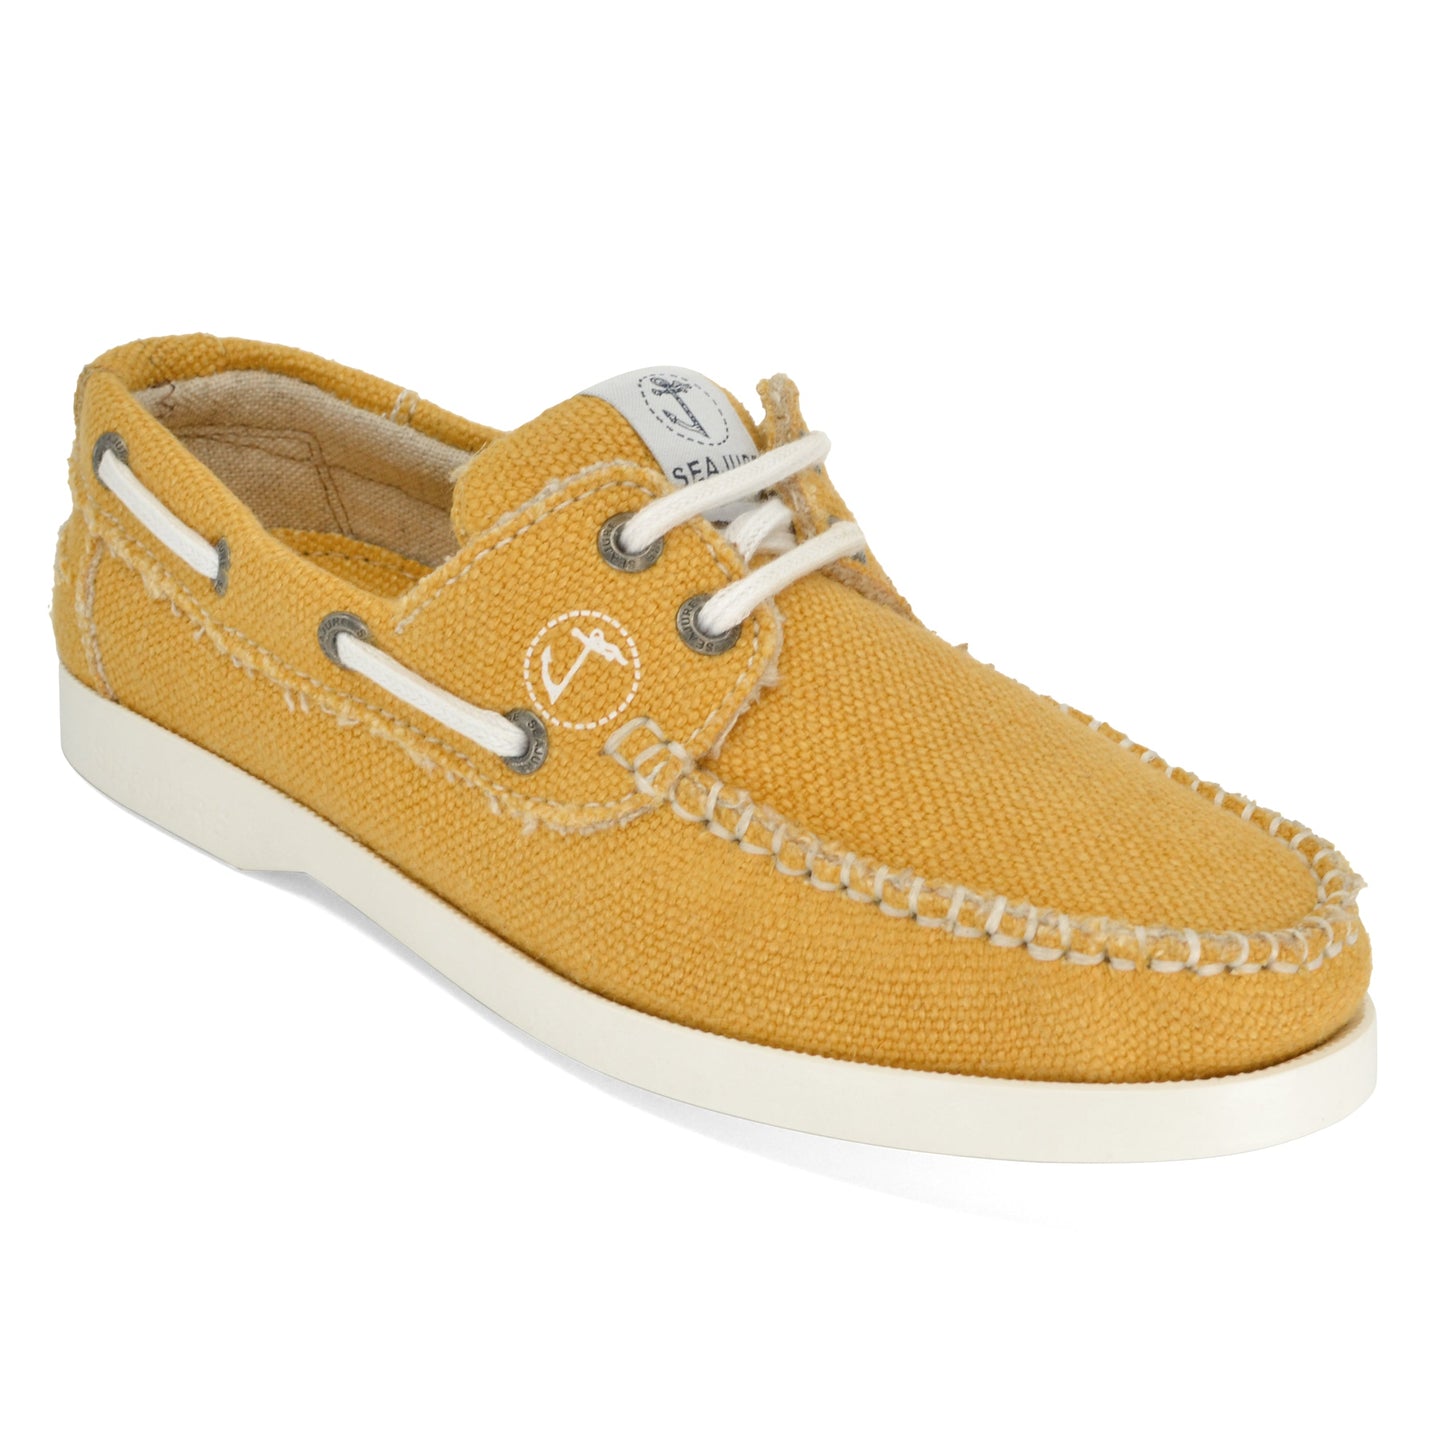 A single mustard yellow Amethyst Hestia Women Hemp & Vegan Boat Shoe Saharun with white laces and a white sole, featuring decorative stitching, metal eyelets, and crafted for sustainability.